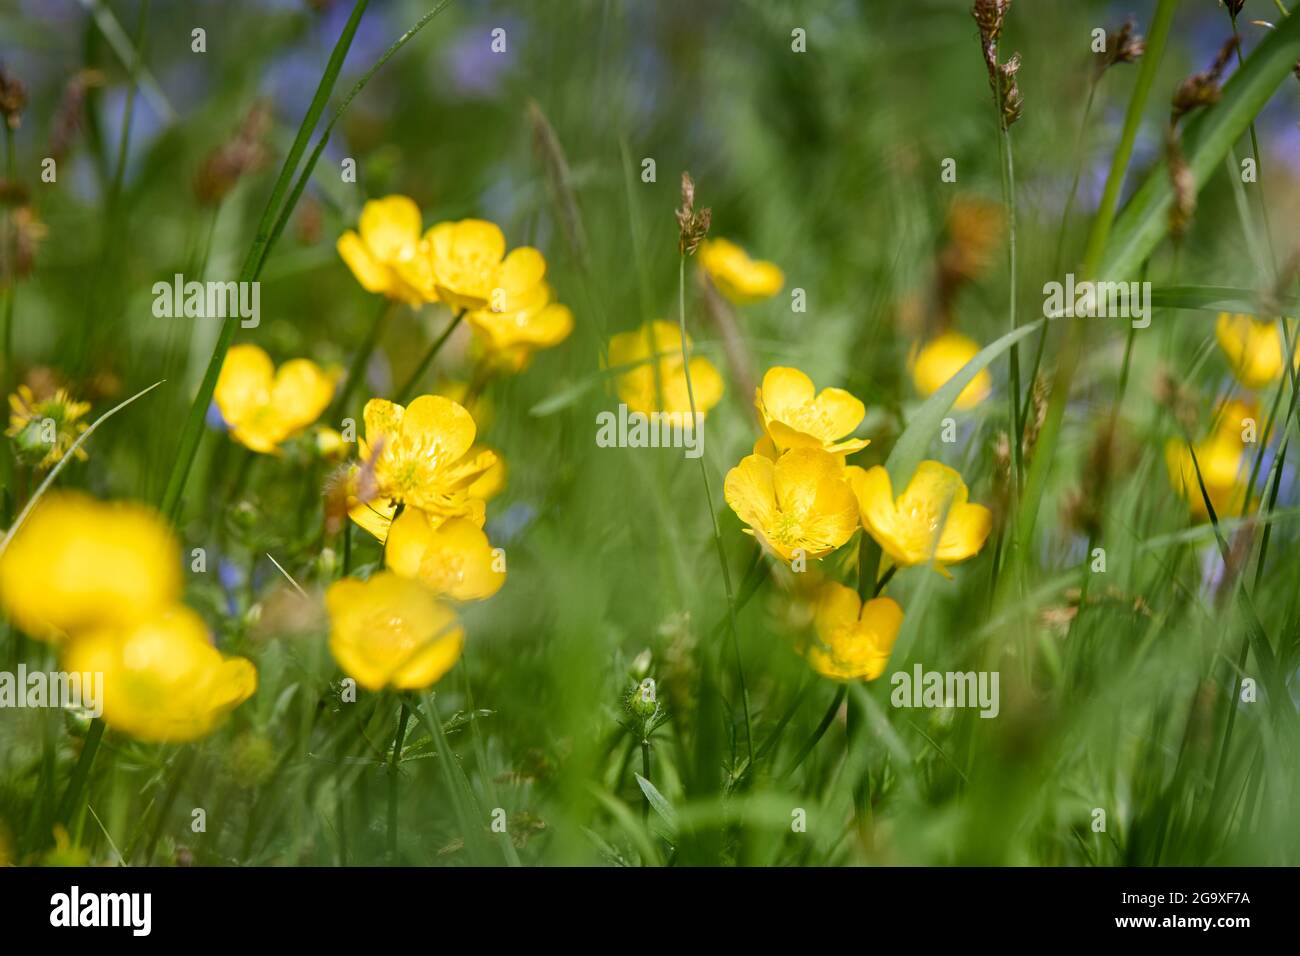 Ranunculus acris Meadow buttercup Tall buttercup selective focus yellow flowers closeup macro in wild nature over out of focus floral background with Stock Photo